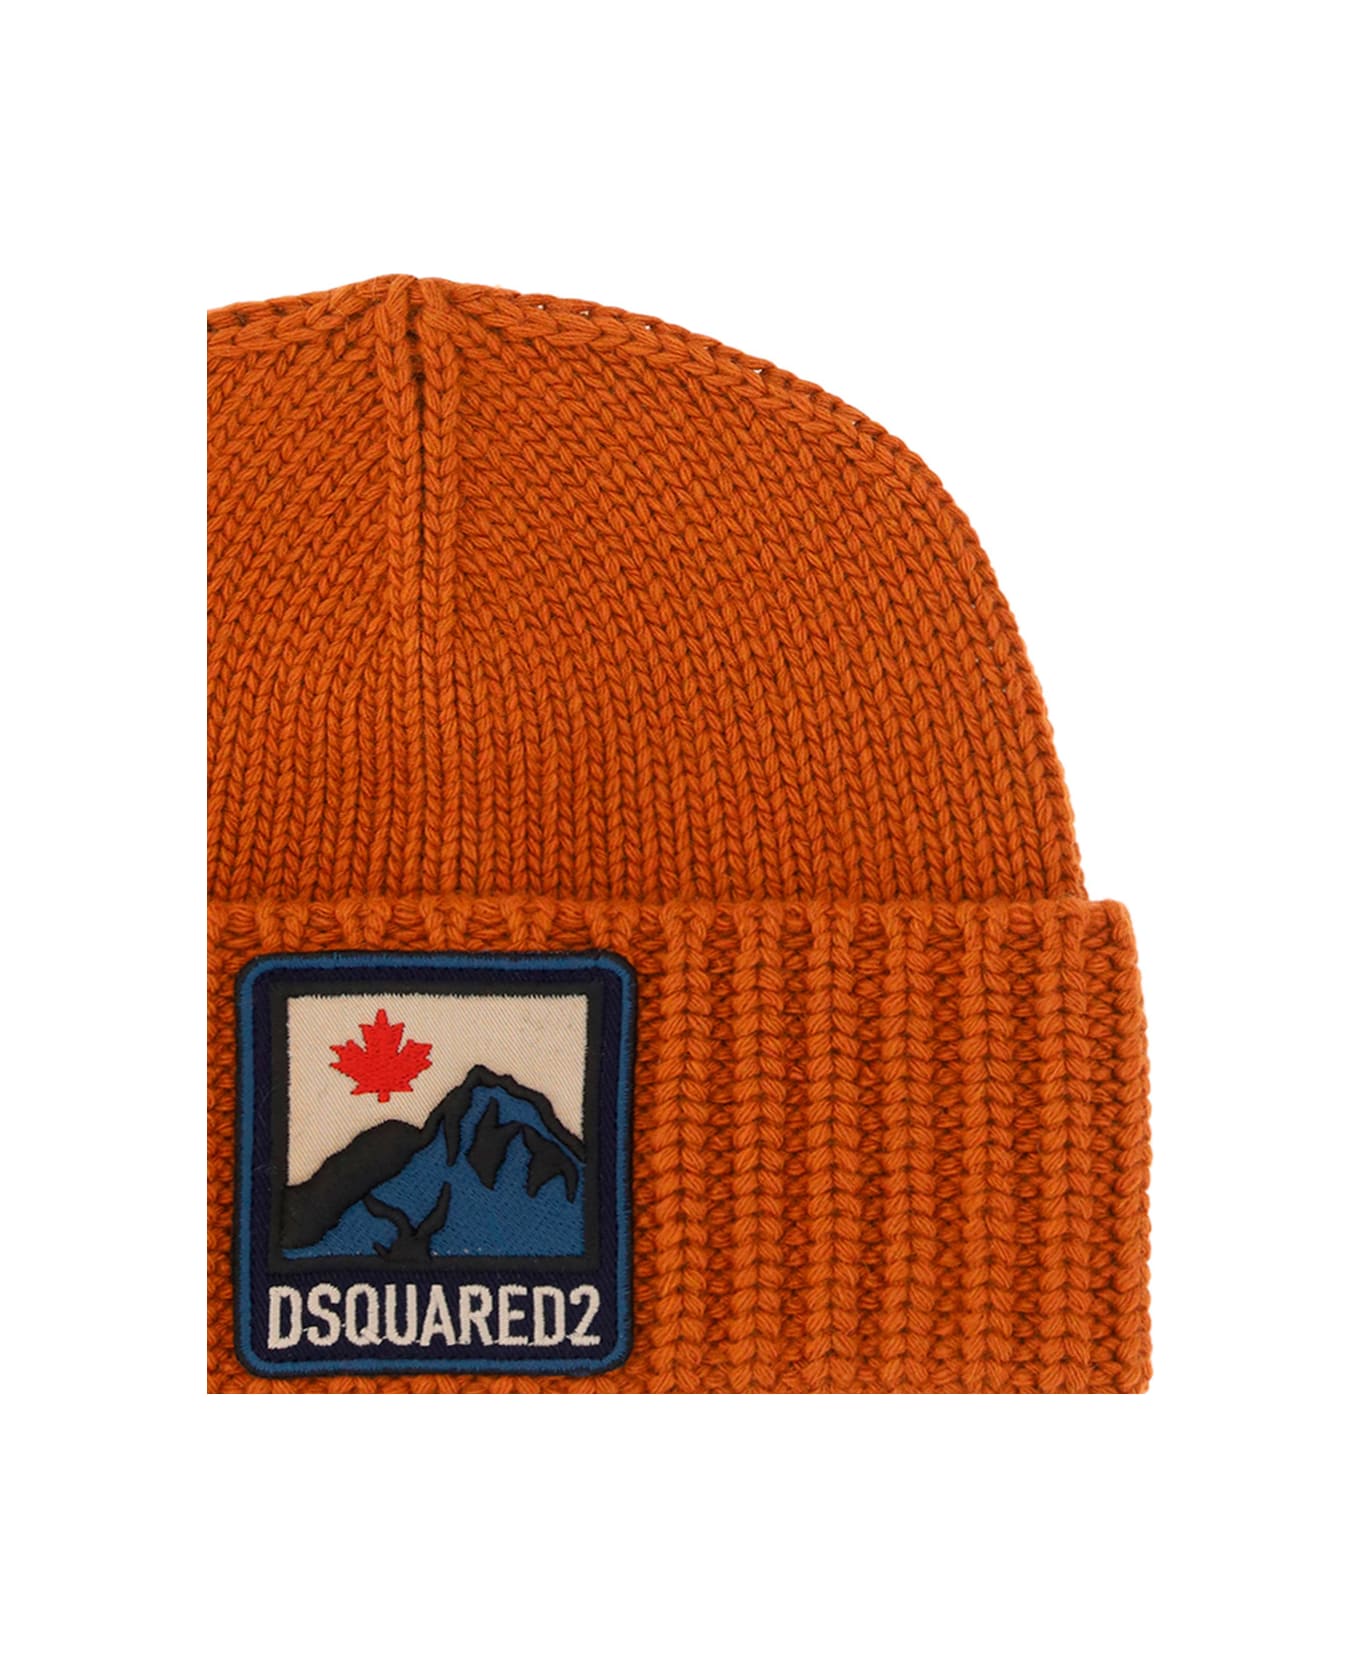 Dsquared2 Mountain Hat - Siena